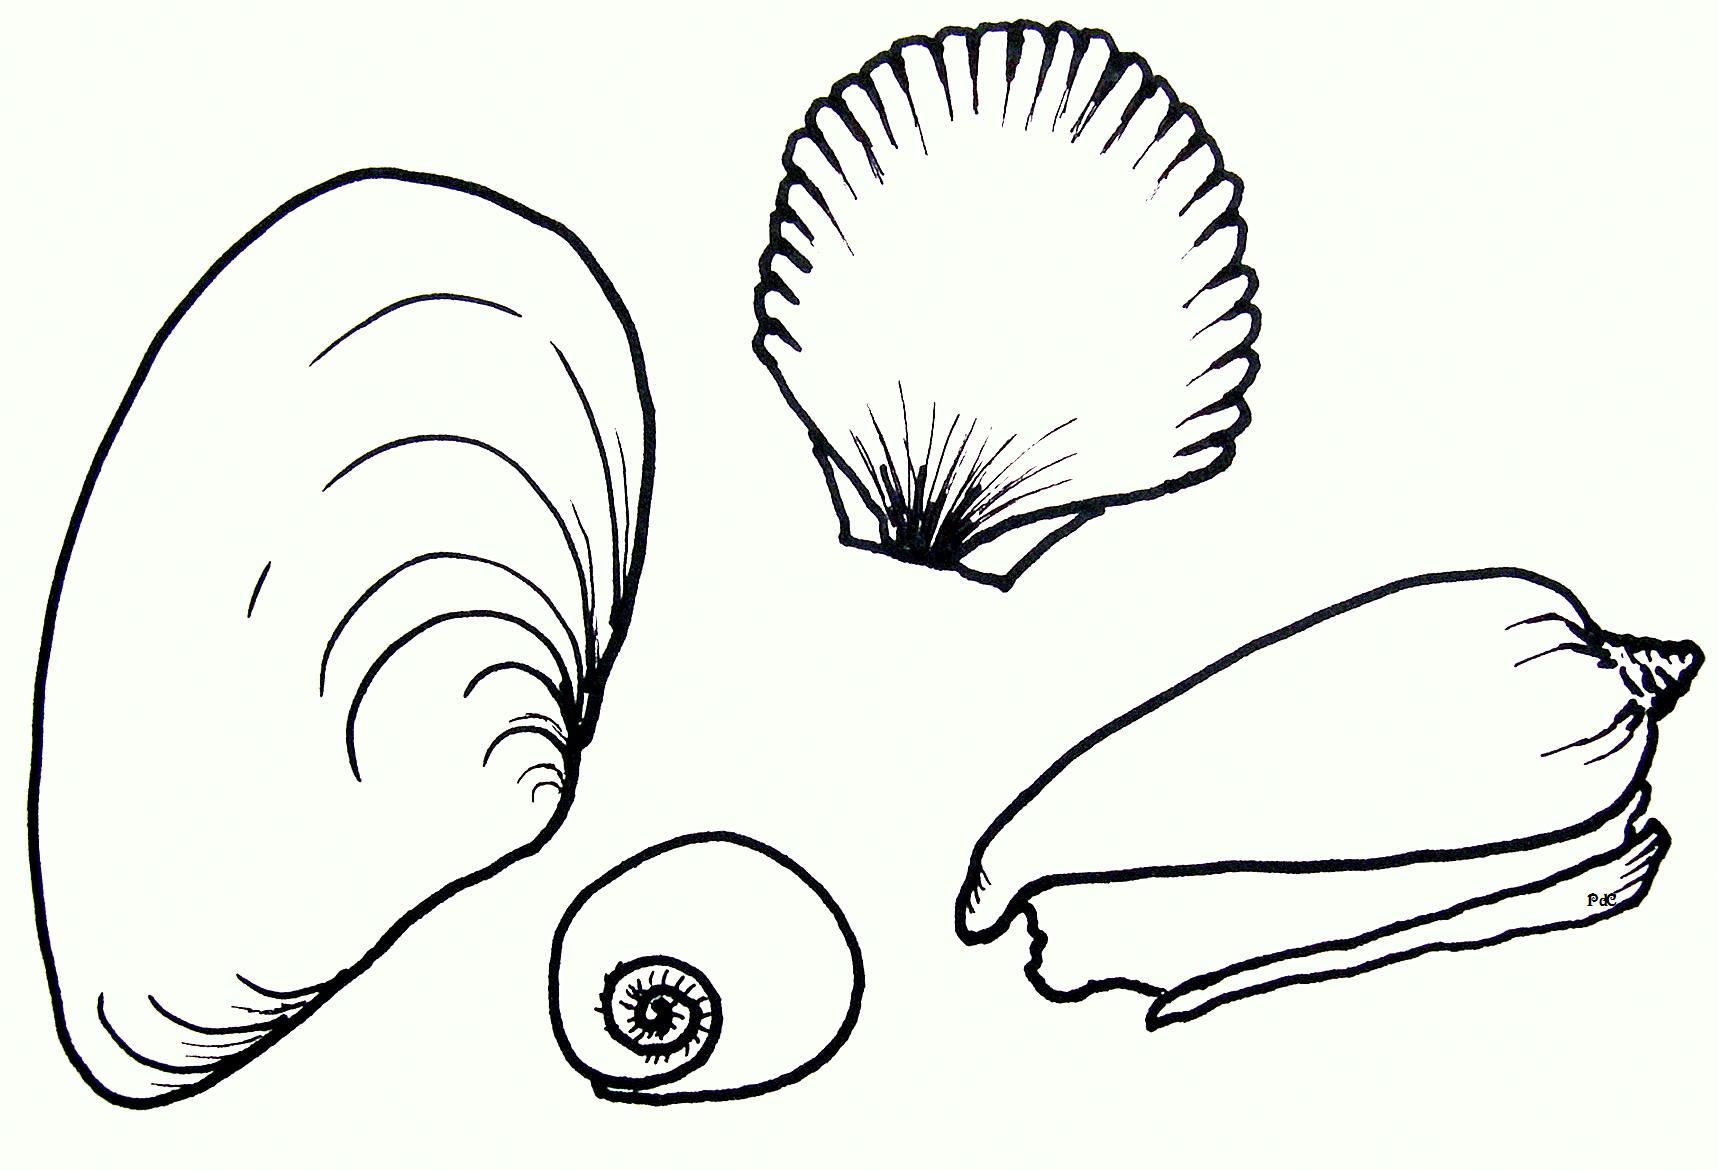 Set of isolated seashell sketches or silhouette of conch, ocean shell or  mollusk scallop, sea or underwater animal fossil. Cockleshell or  cockleboat. Nautical … | 魚